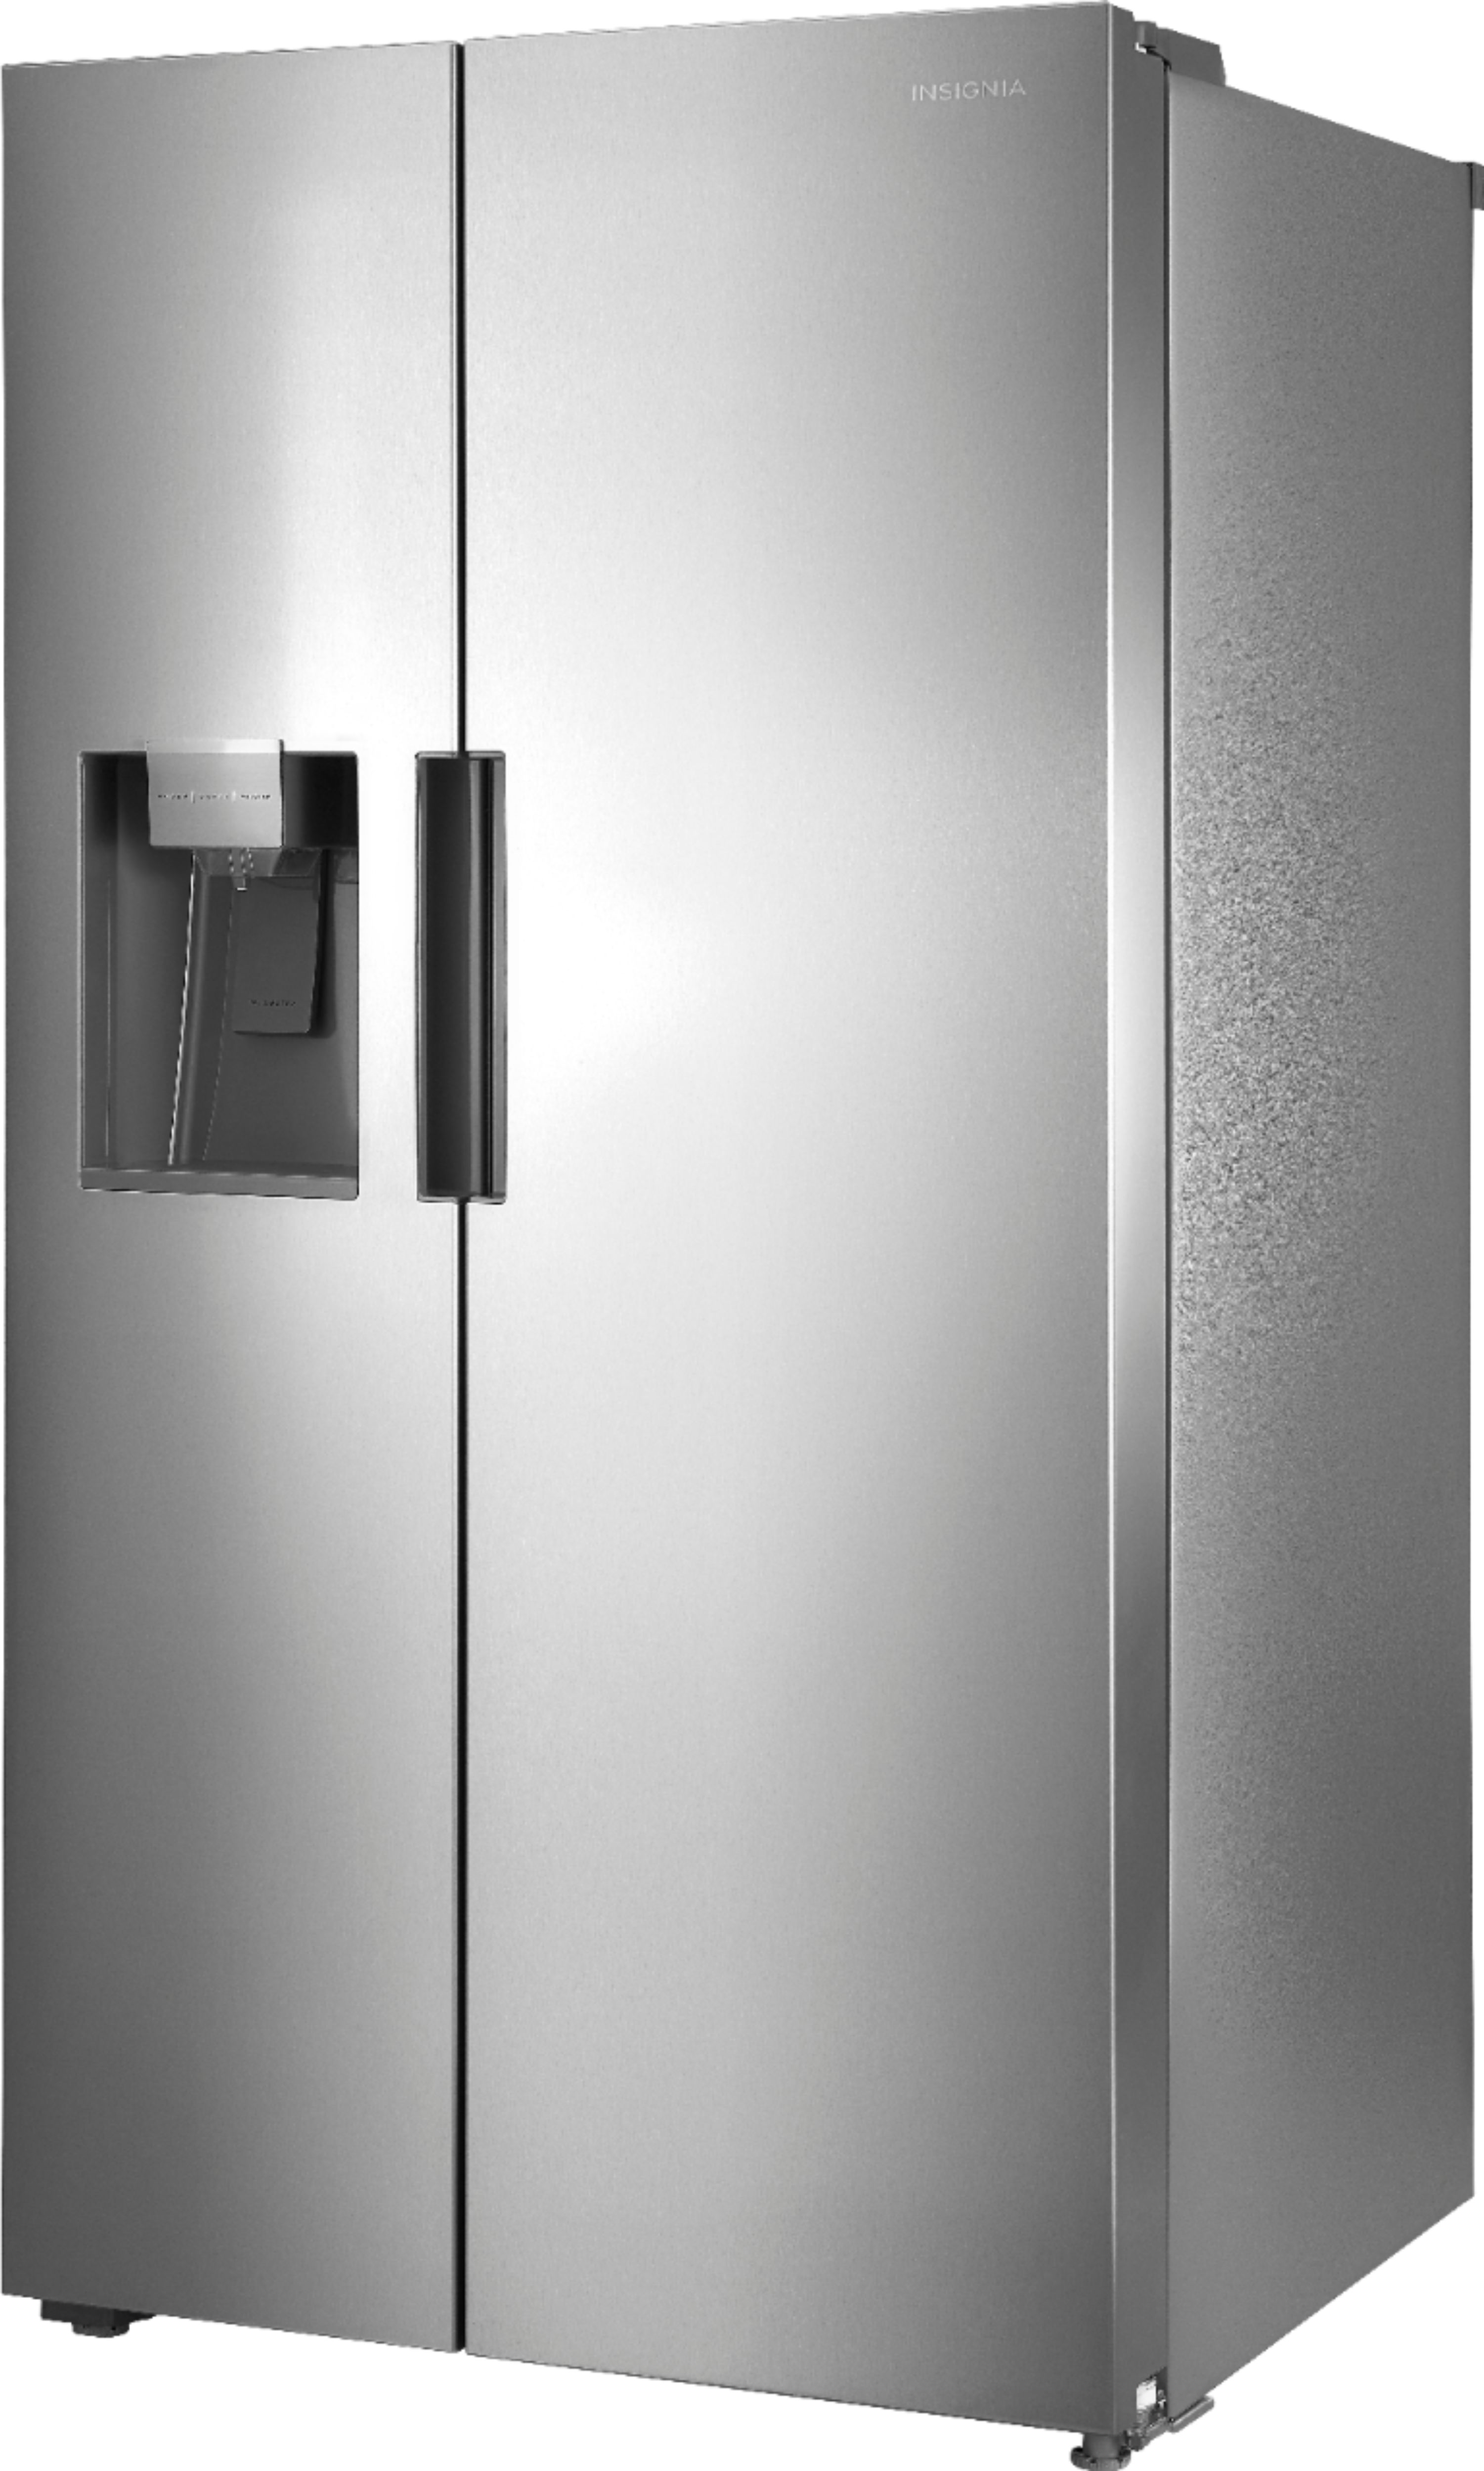 Left View: Insignia™ - 26 5/16 Cu. Ft. Side-by-Side Refrigerator - Stainless steel